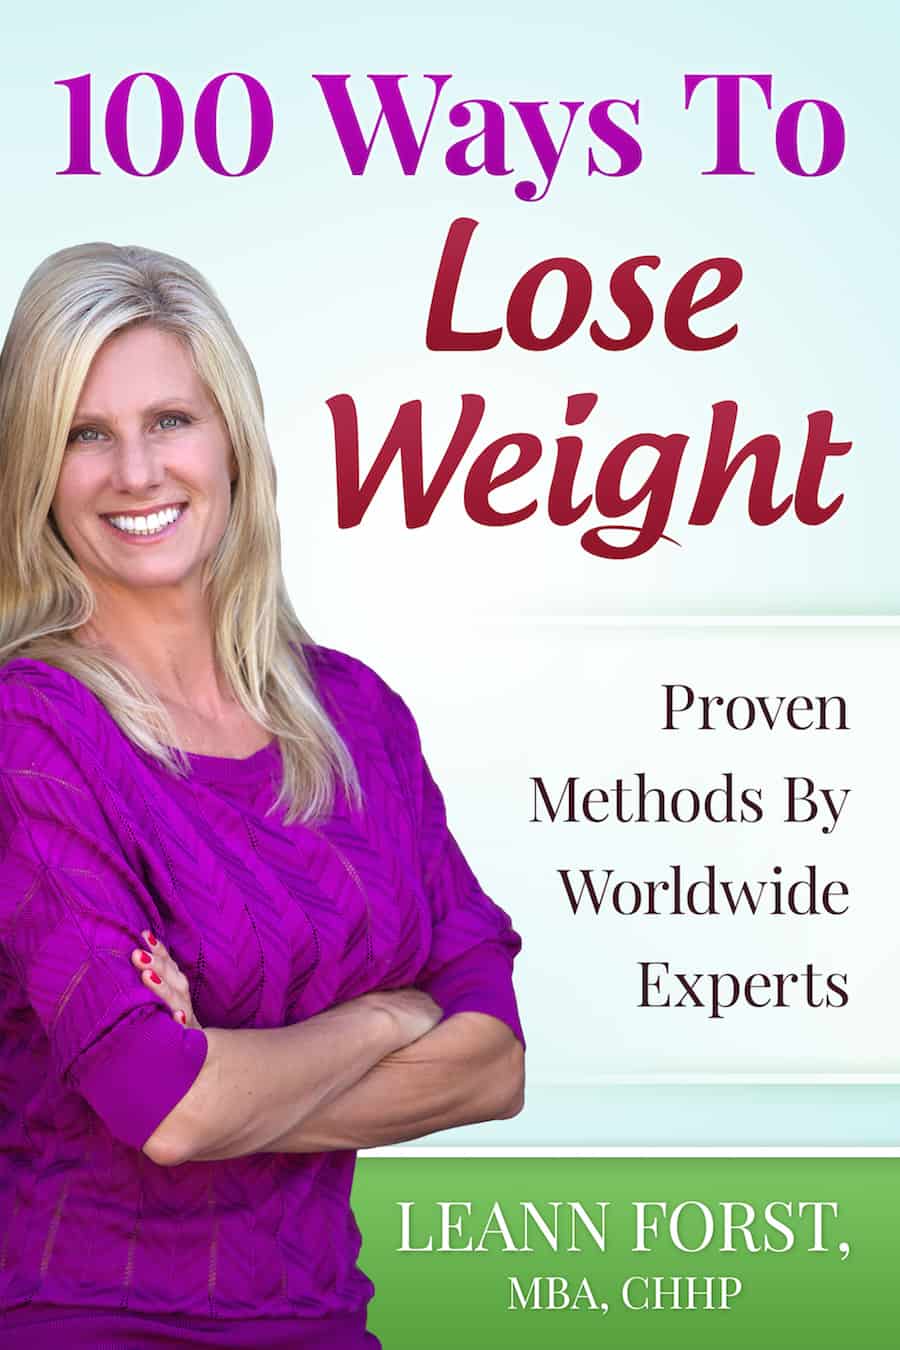 100 Ways to Lose Weight | GroovyBeets.com